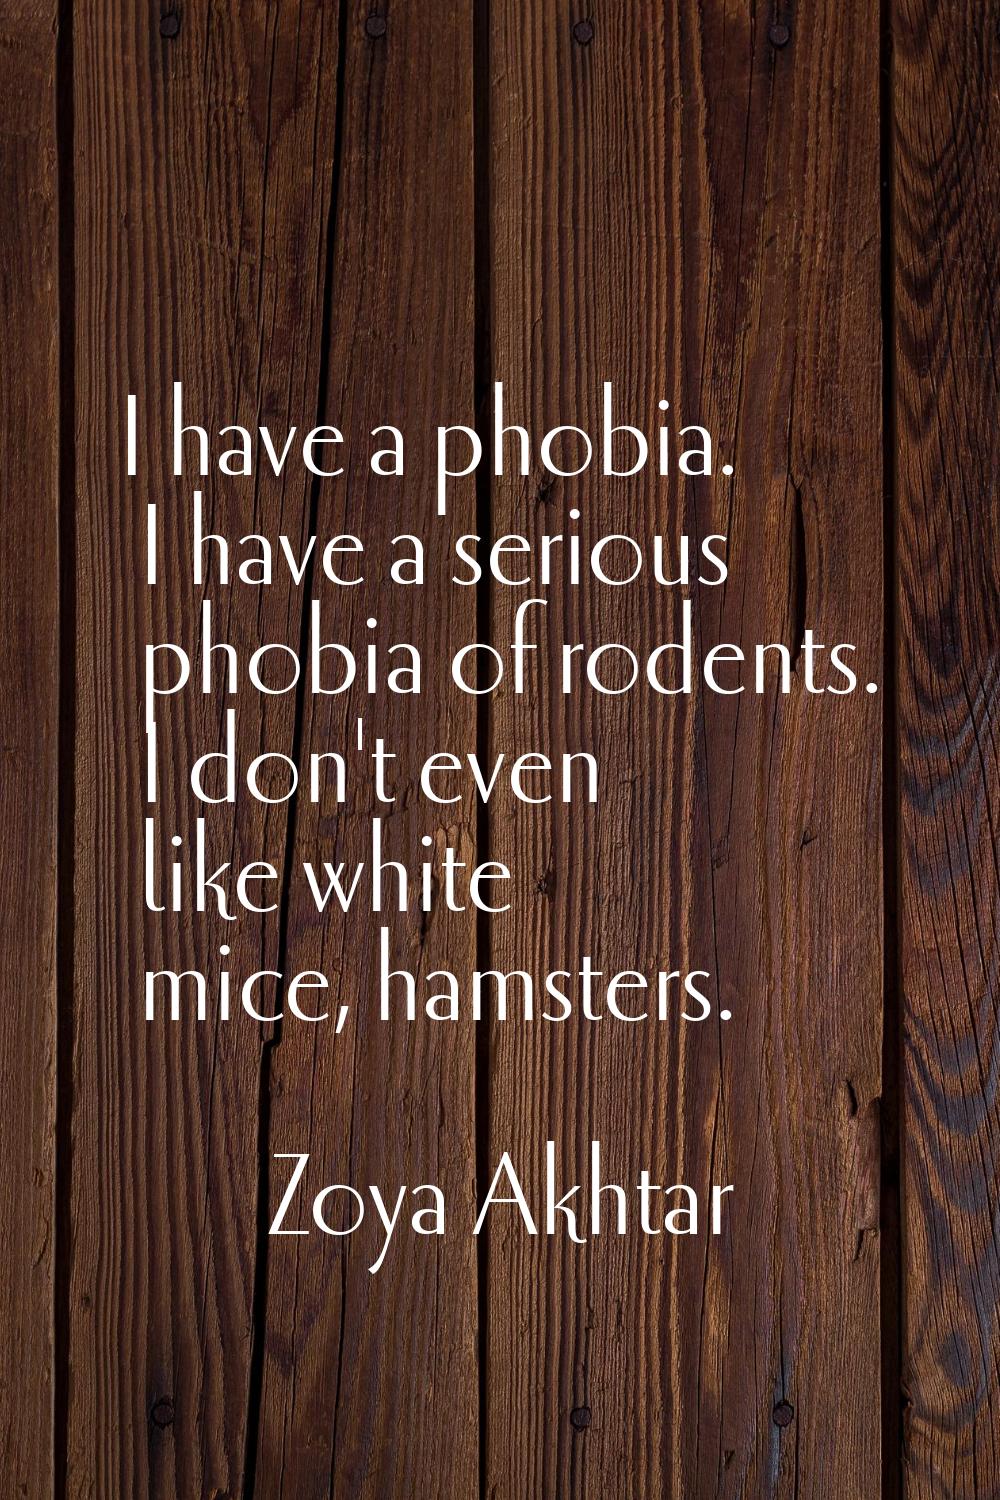 I have a phobia. I have a serious phobia of rodents. I don't even like white mice, hamsters.